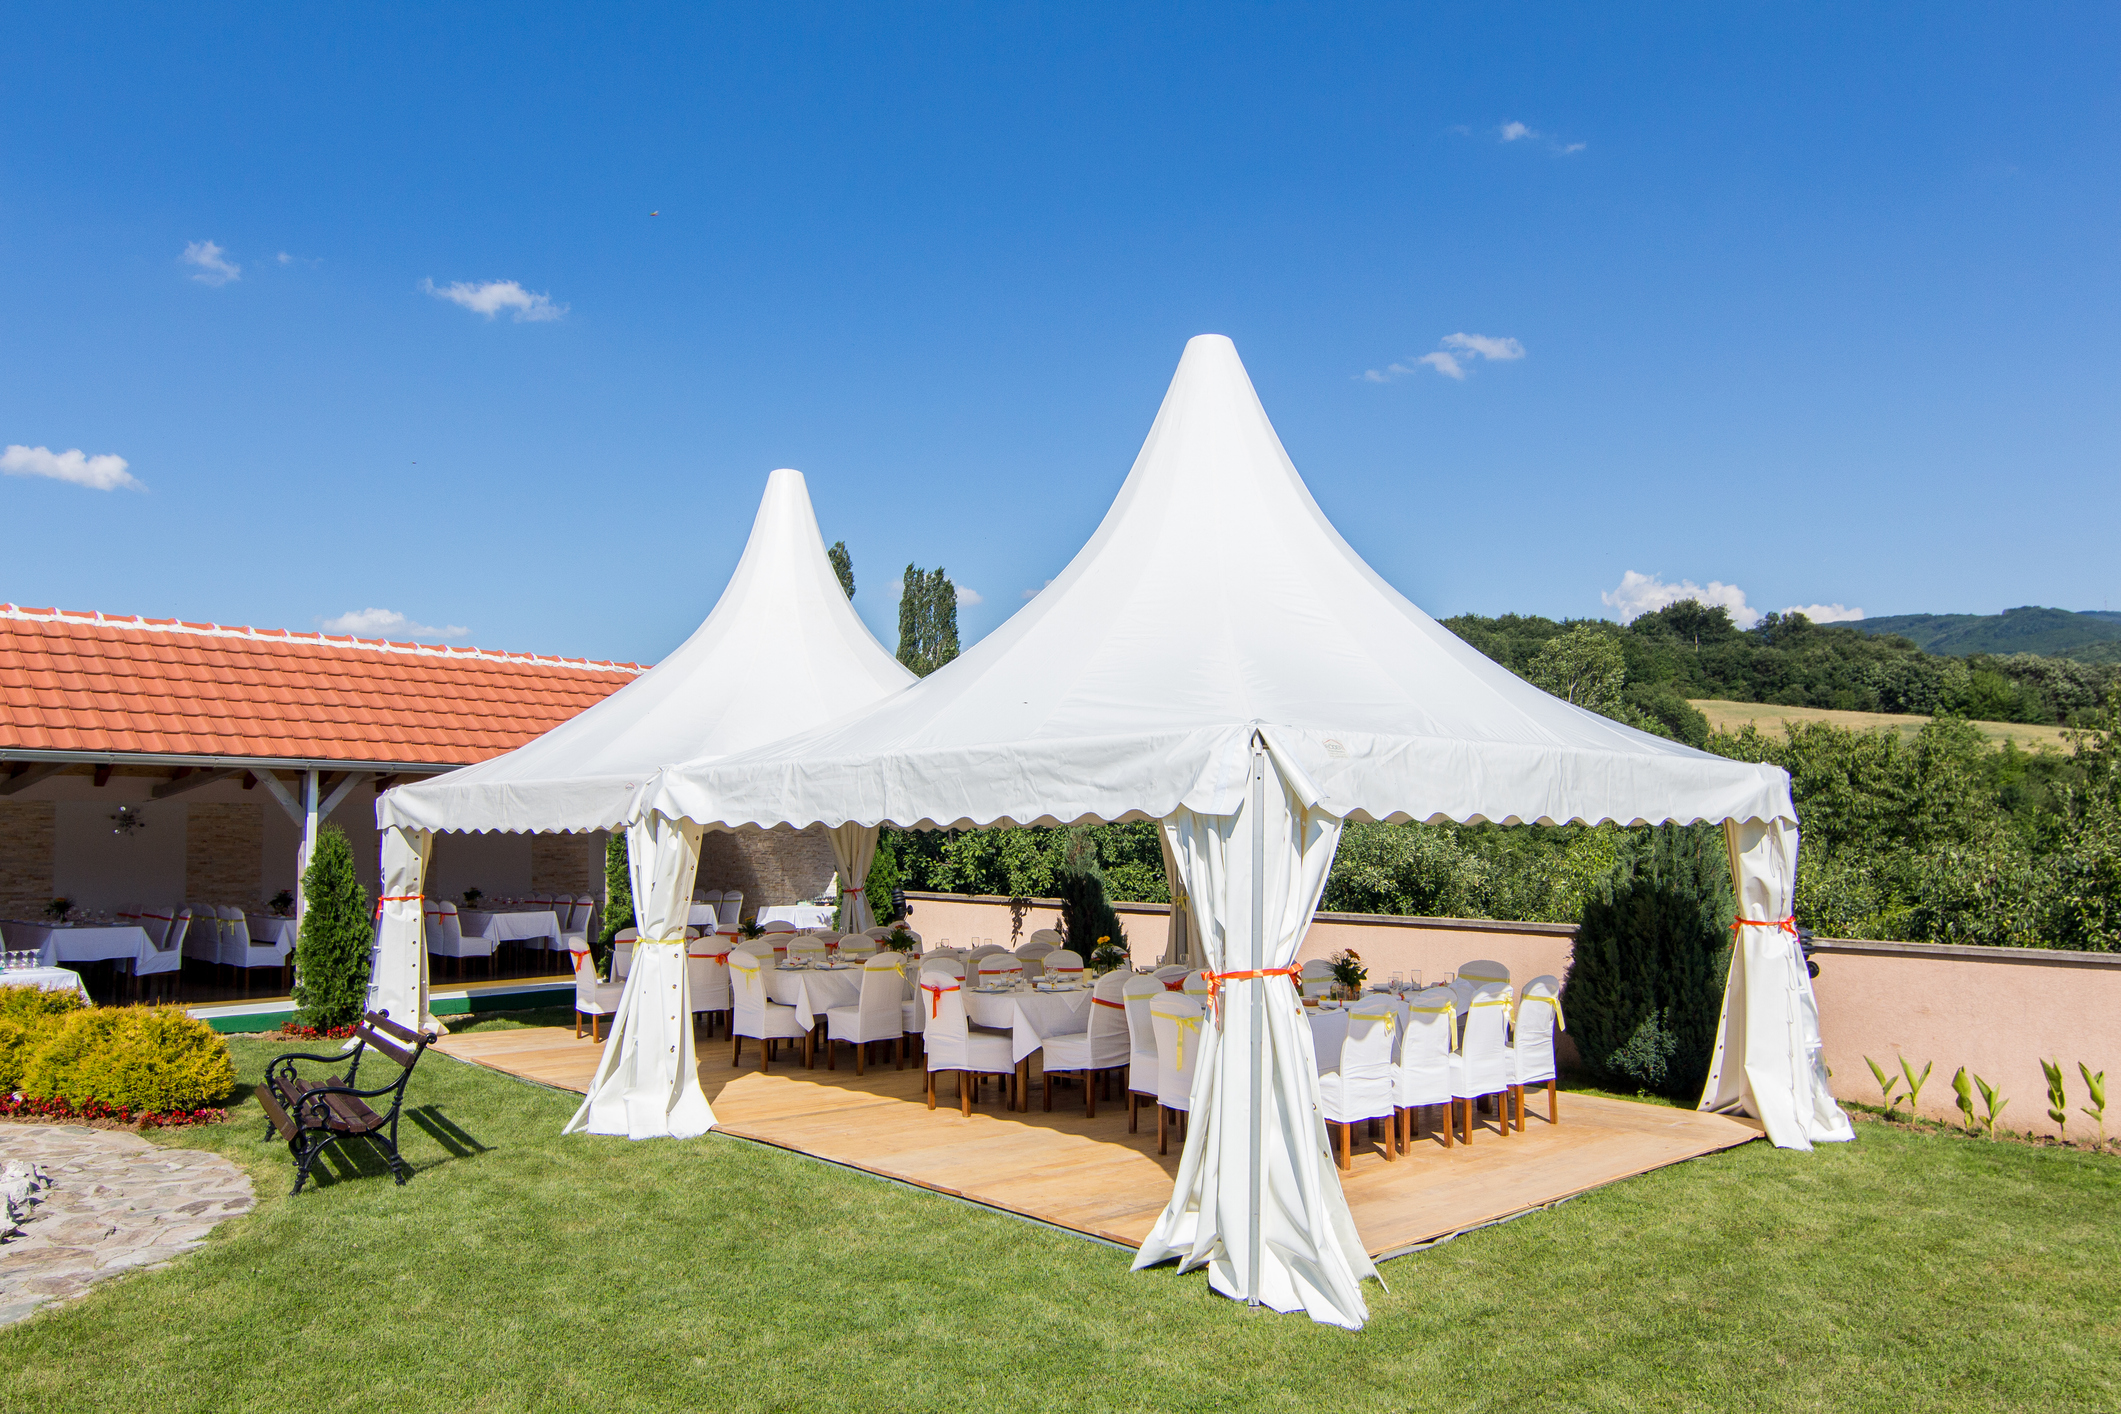 What Size Tent Do I Need for My Party?